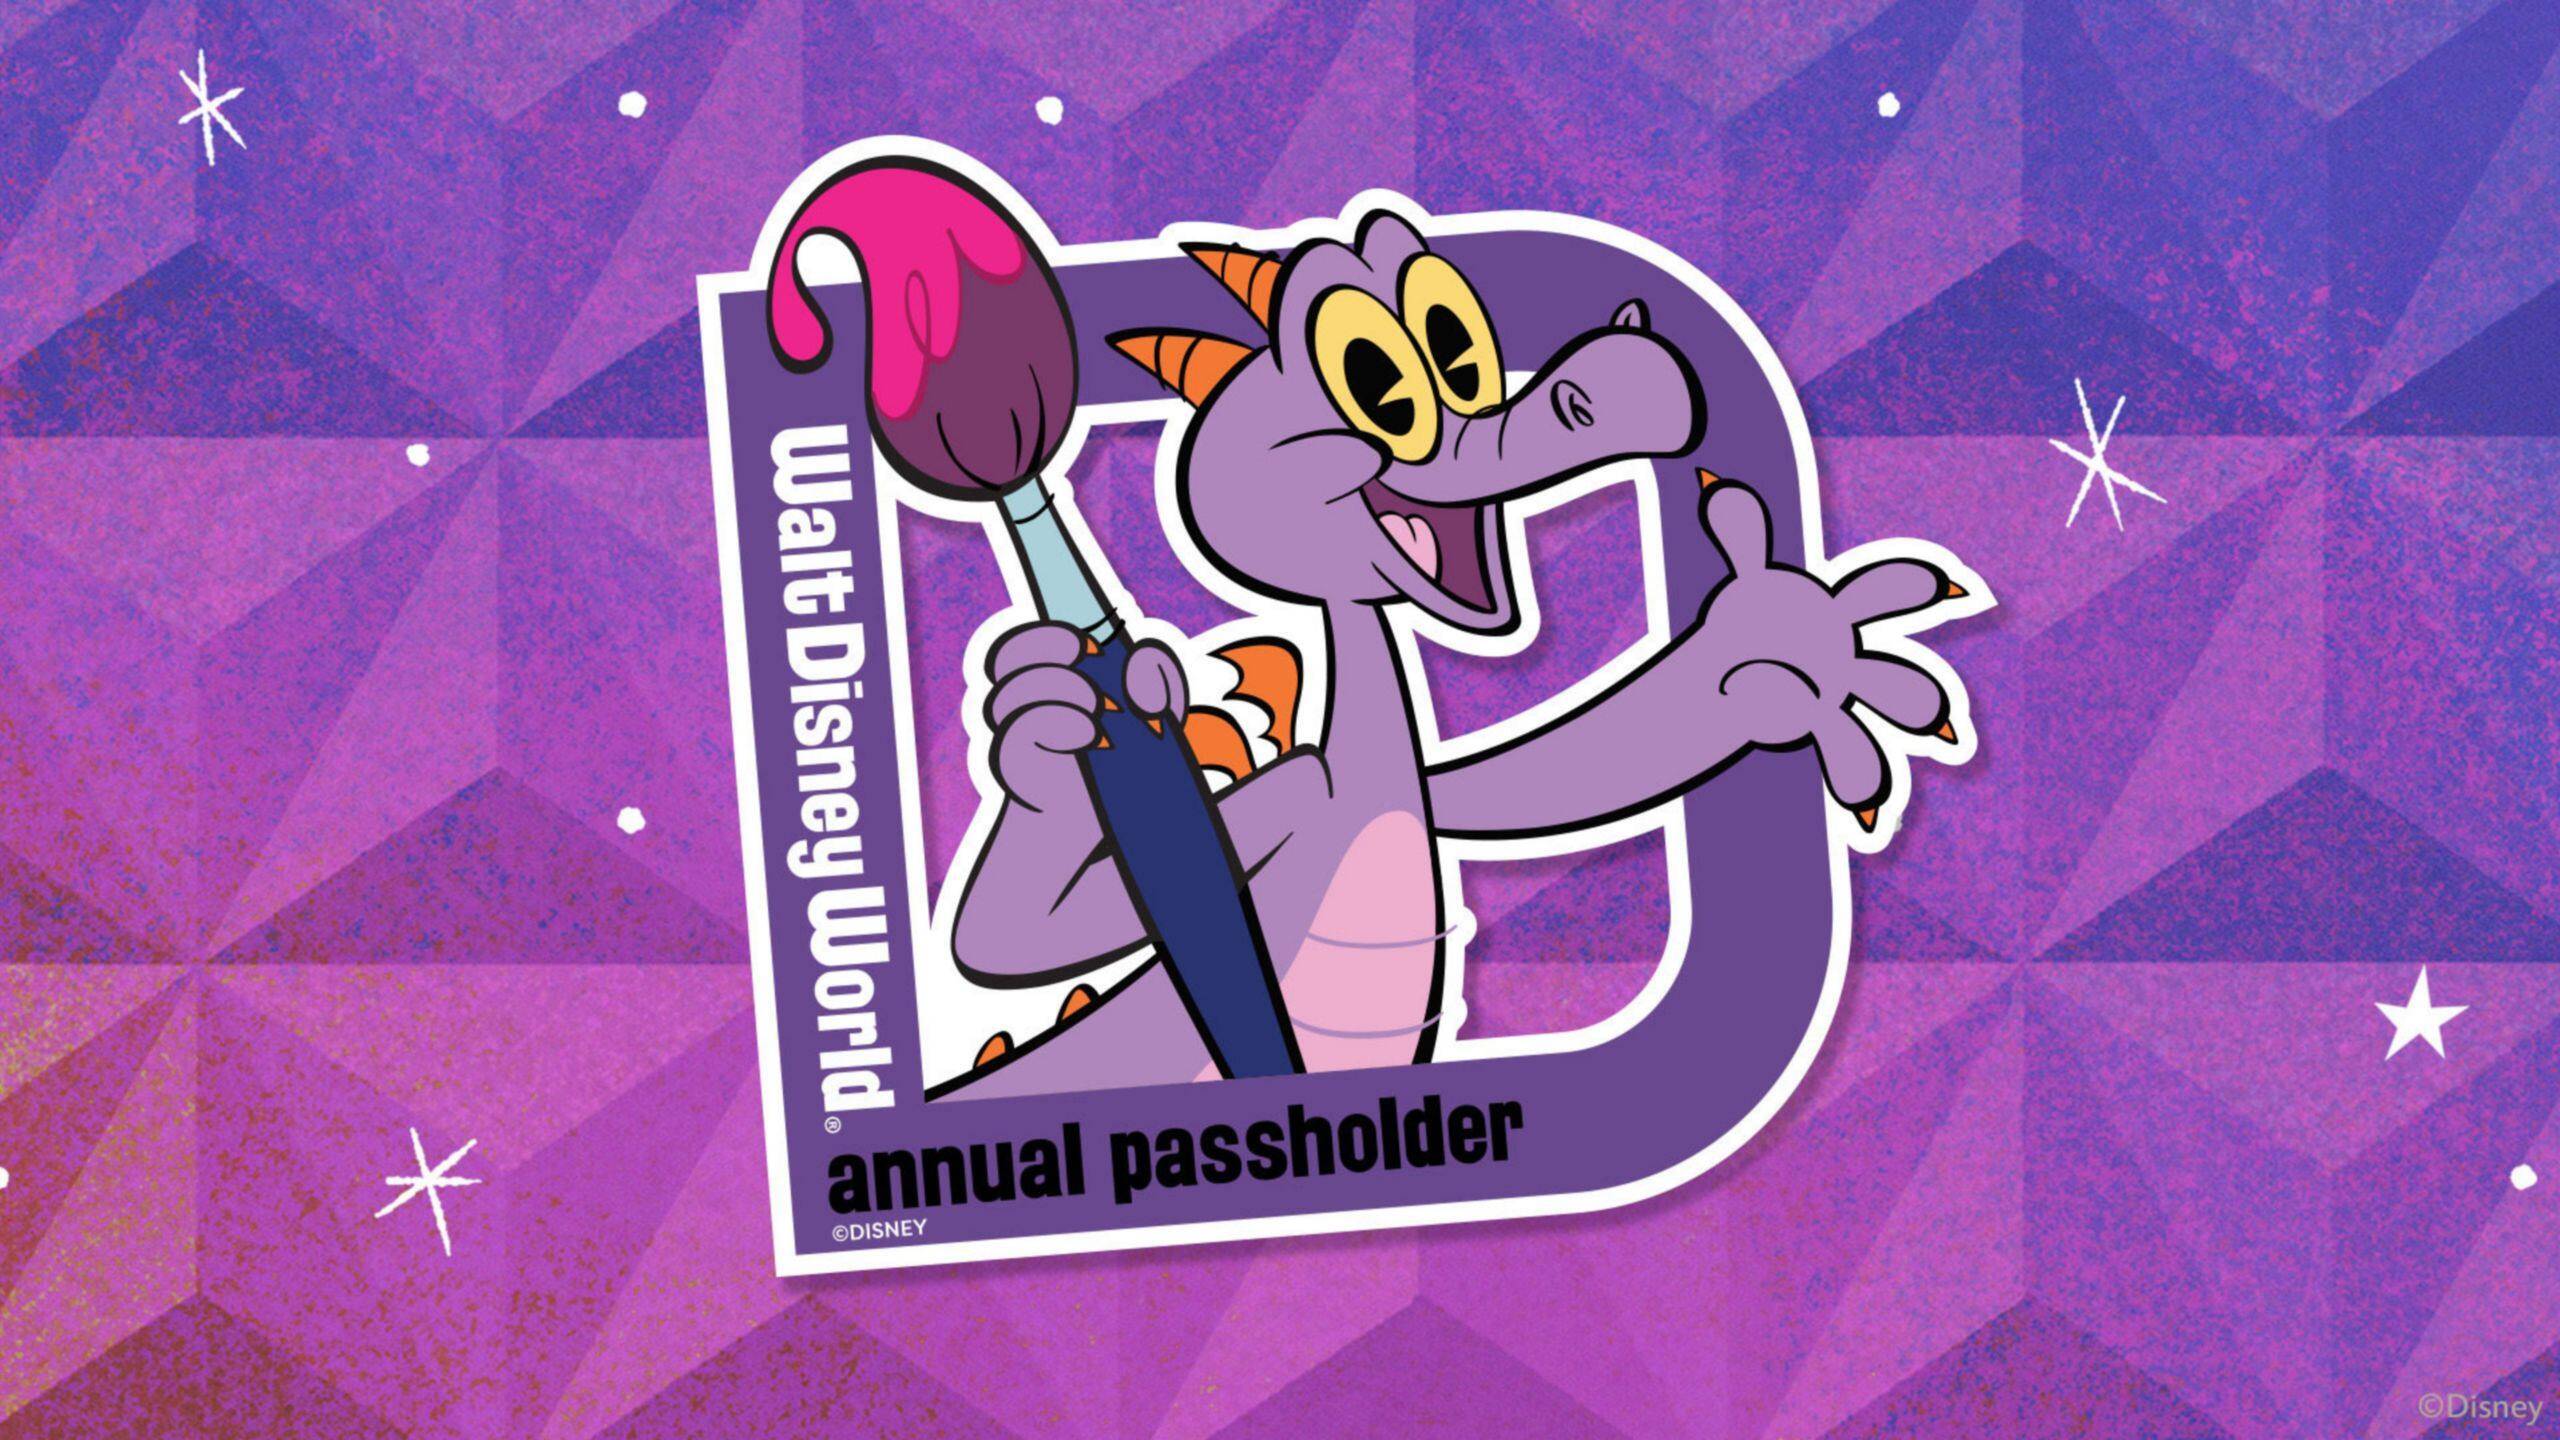 How to get your Annual Passholder-exclusive Figment magnet at Walt Disney World this summer